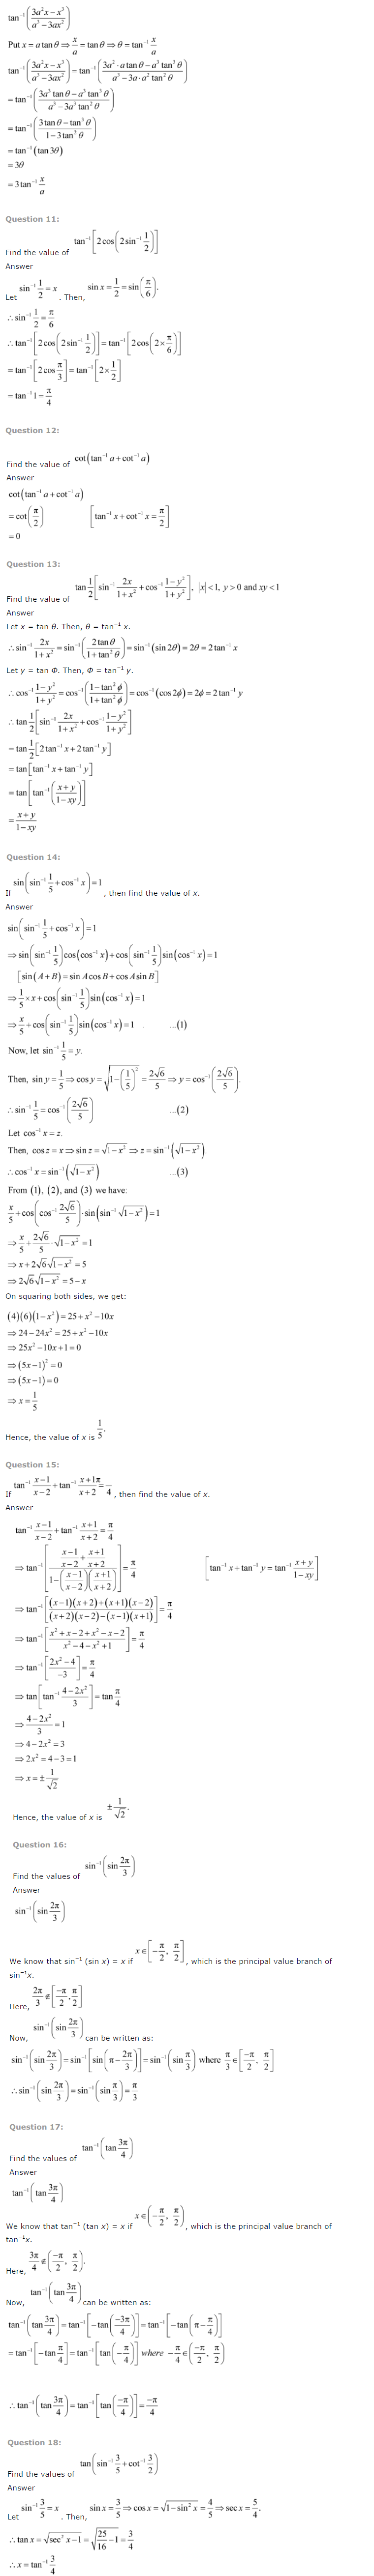 NCERT Solutions for Class 12 Maths Chapter 2 Inverse Trigonometric Functions ex 2.3